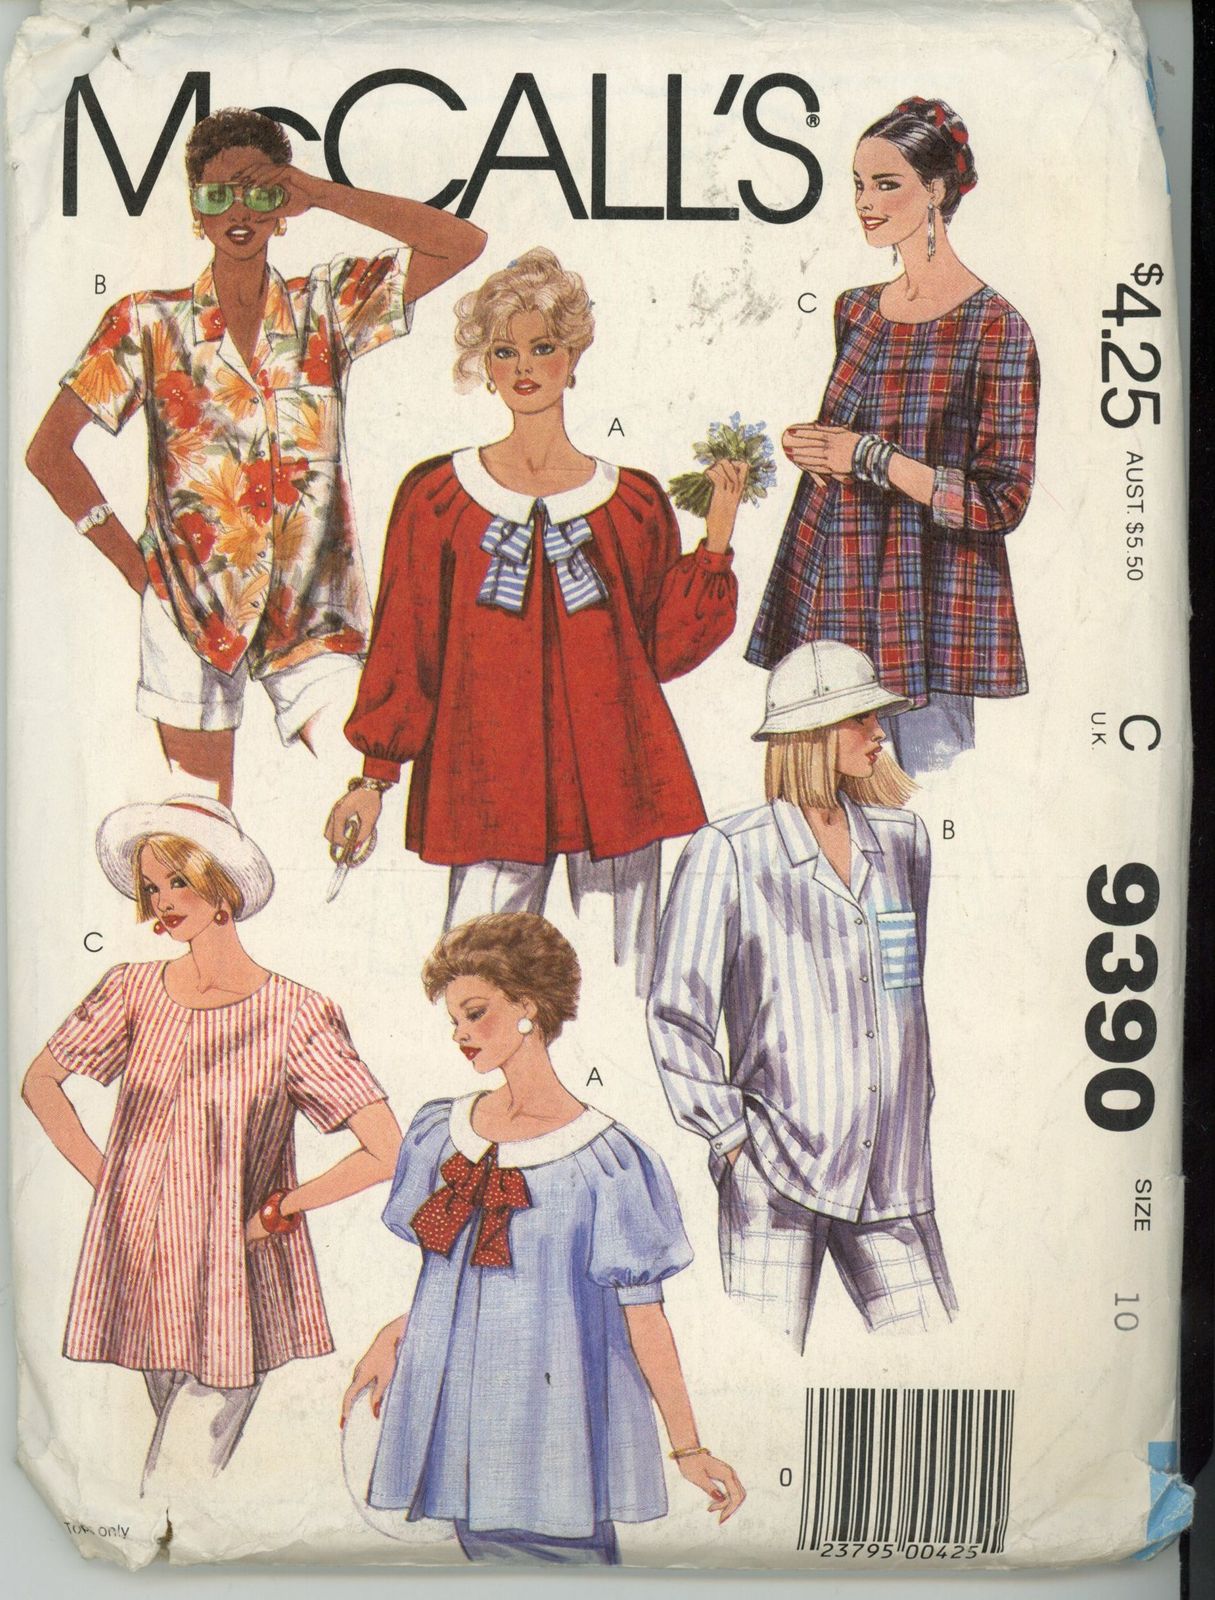 Mccall's 9390 Maternity Tops and Tie Size 10 Vintage - $4.00